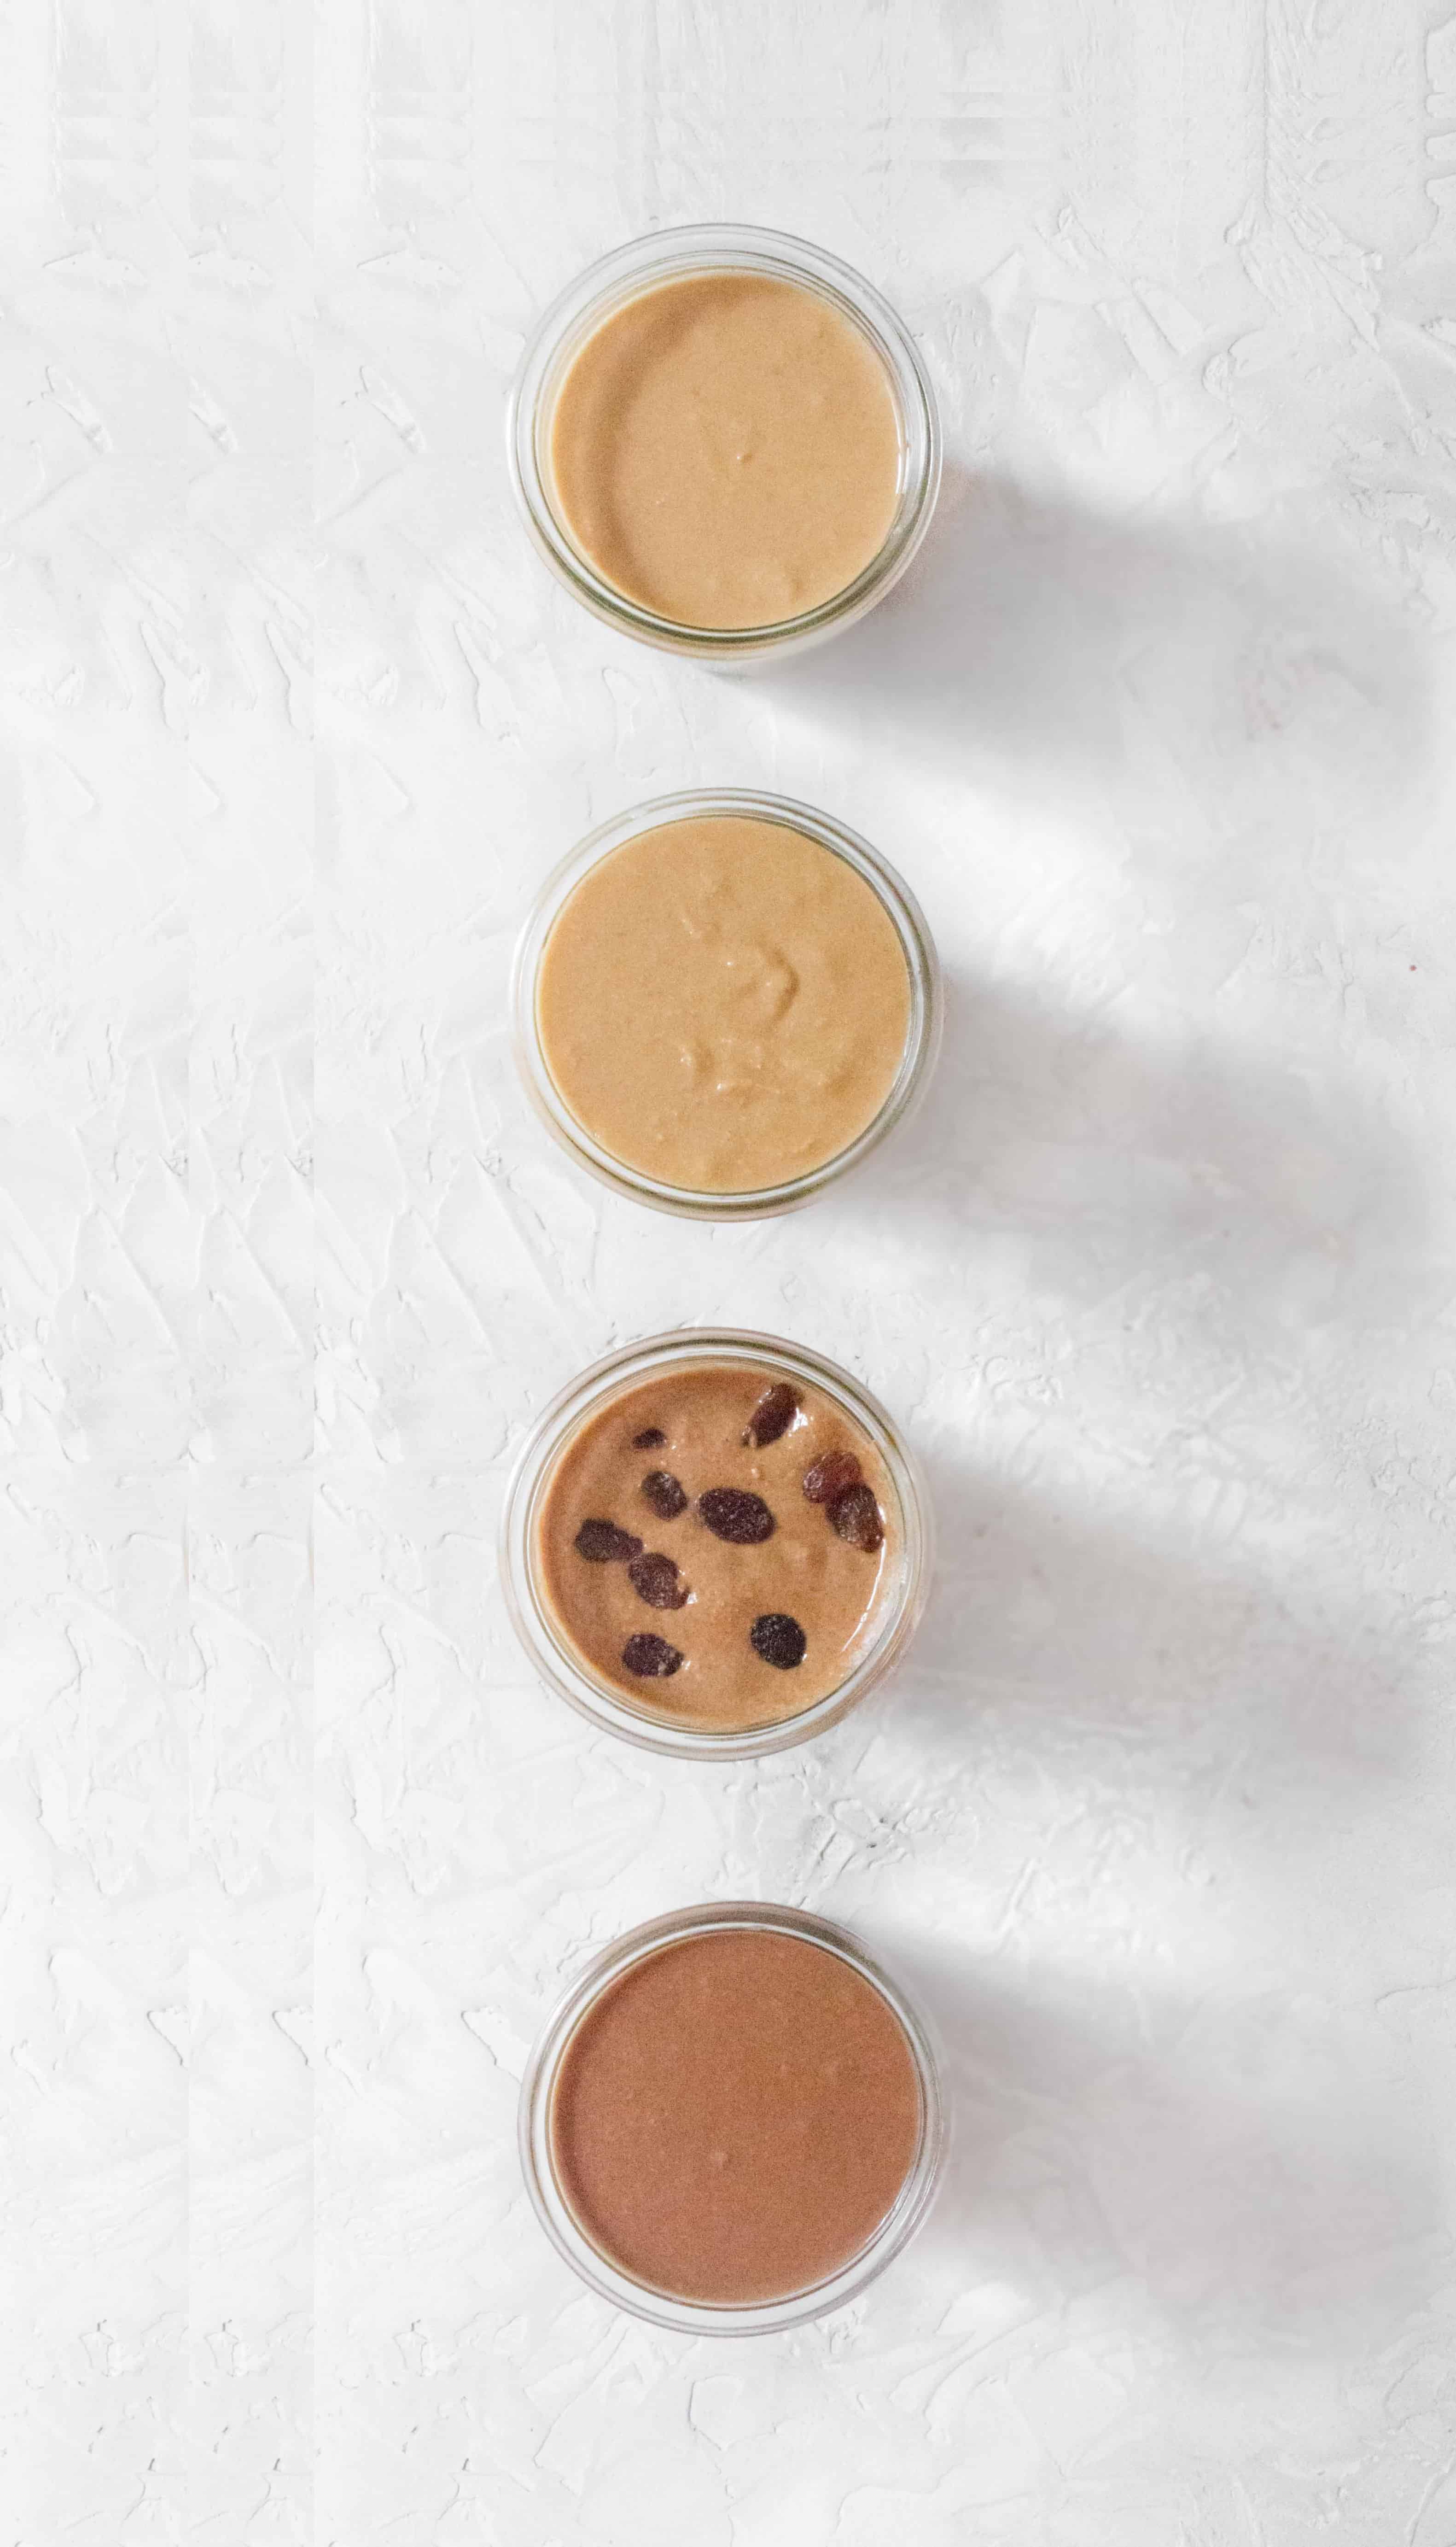 Have you ever made Homemade Peanut Butter? Homemade Peanut Butter is so easy to make at home and is much cheaper and tastier than store bought! Here's how to make your own and 3 easy variations!